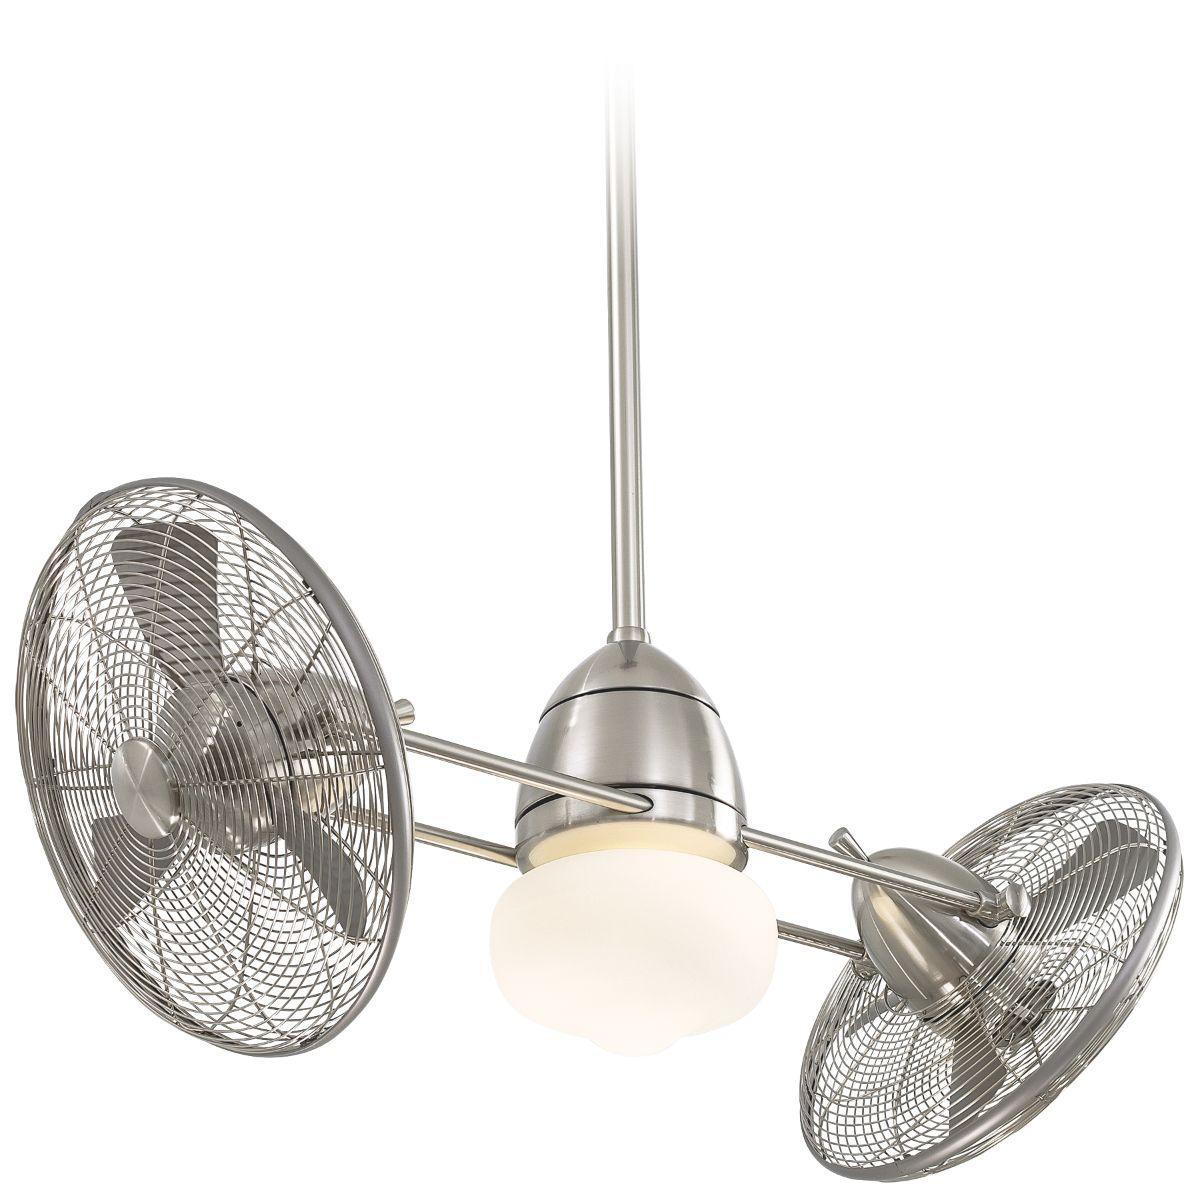 Gyro 42 Inch Contemporary Dual Outdoor Ceiling Fan With Light, Wall Control Included